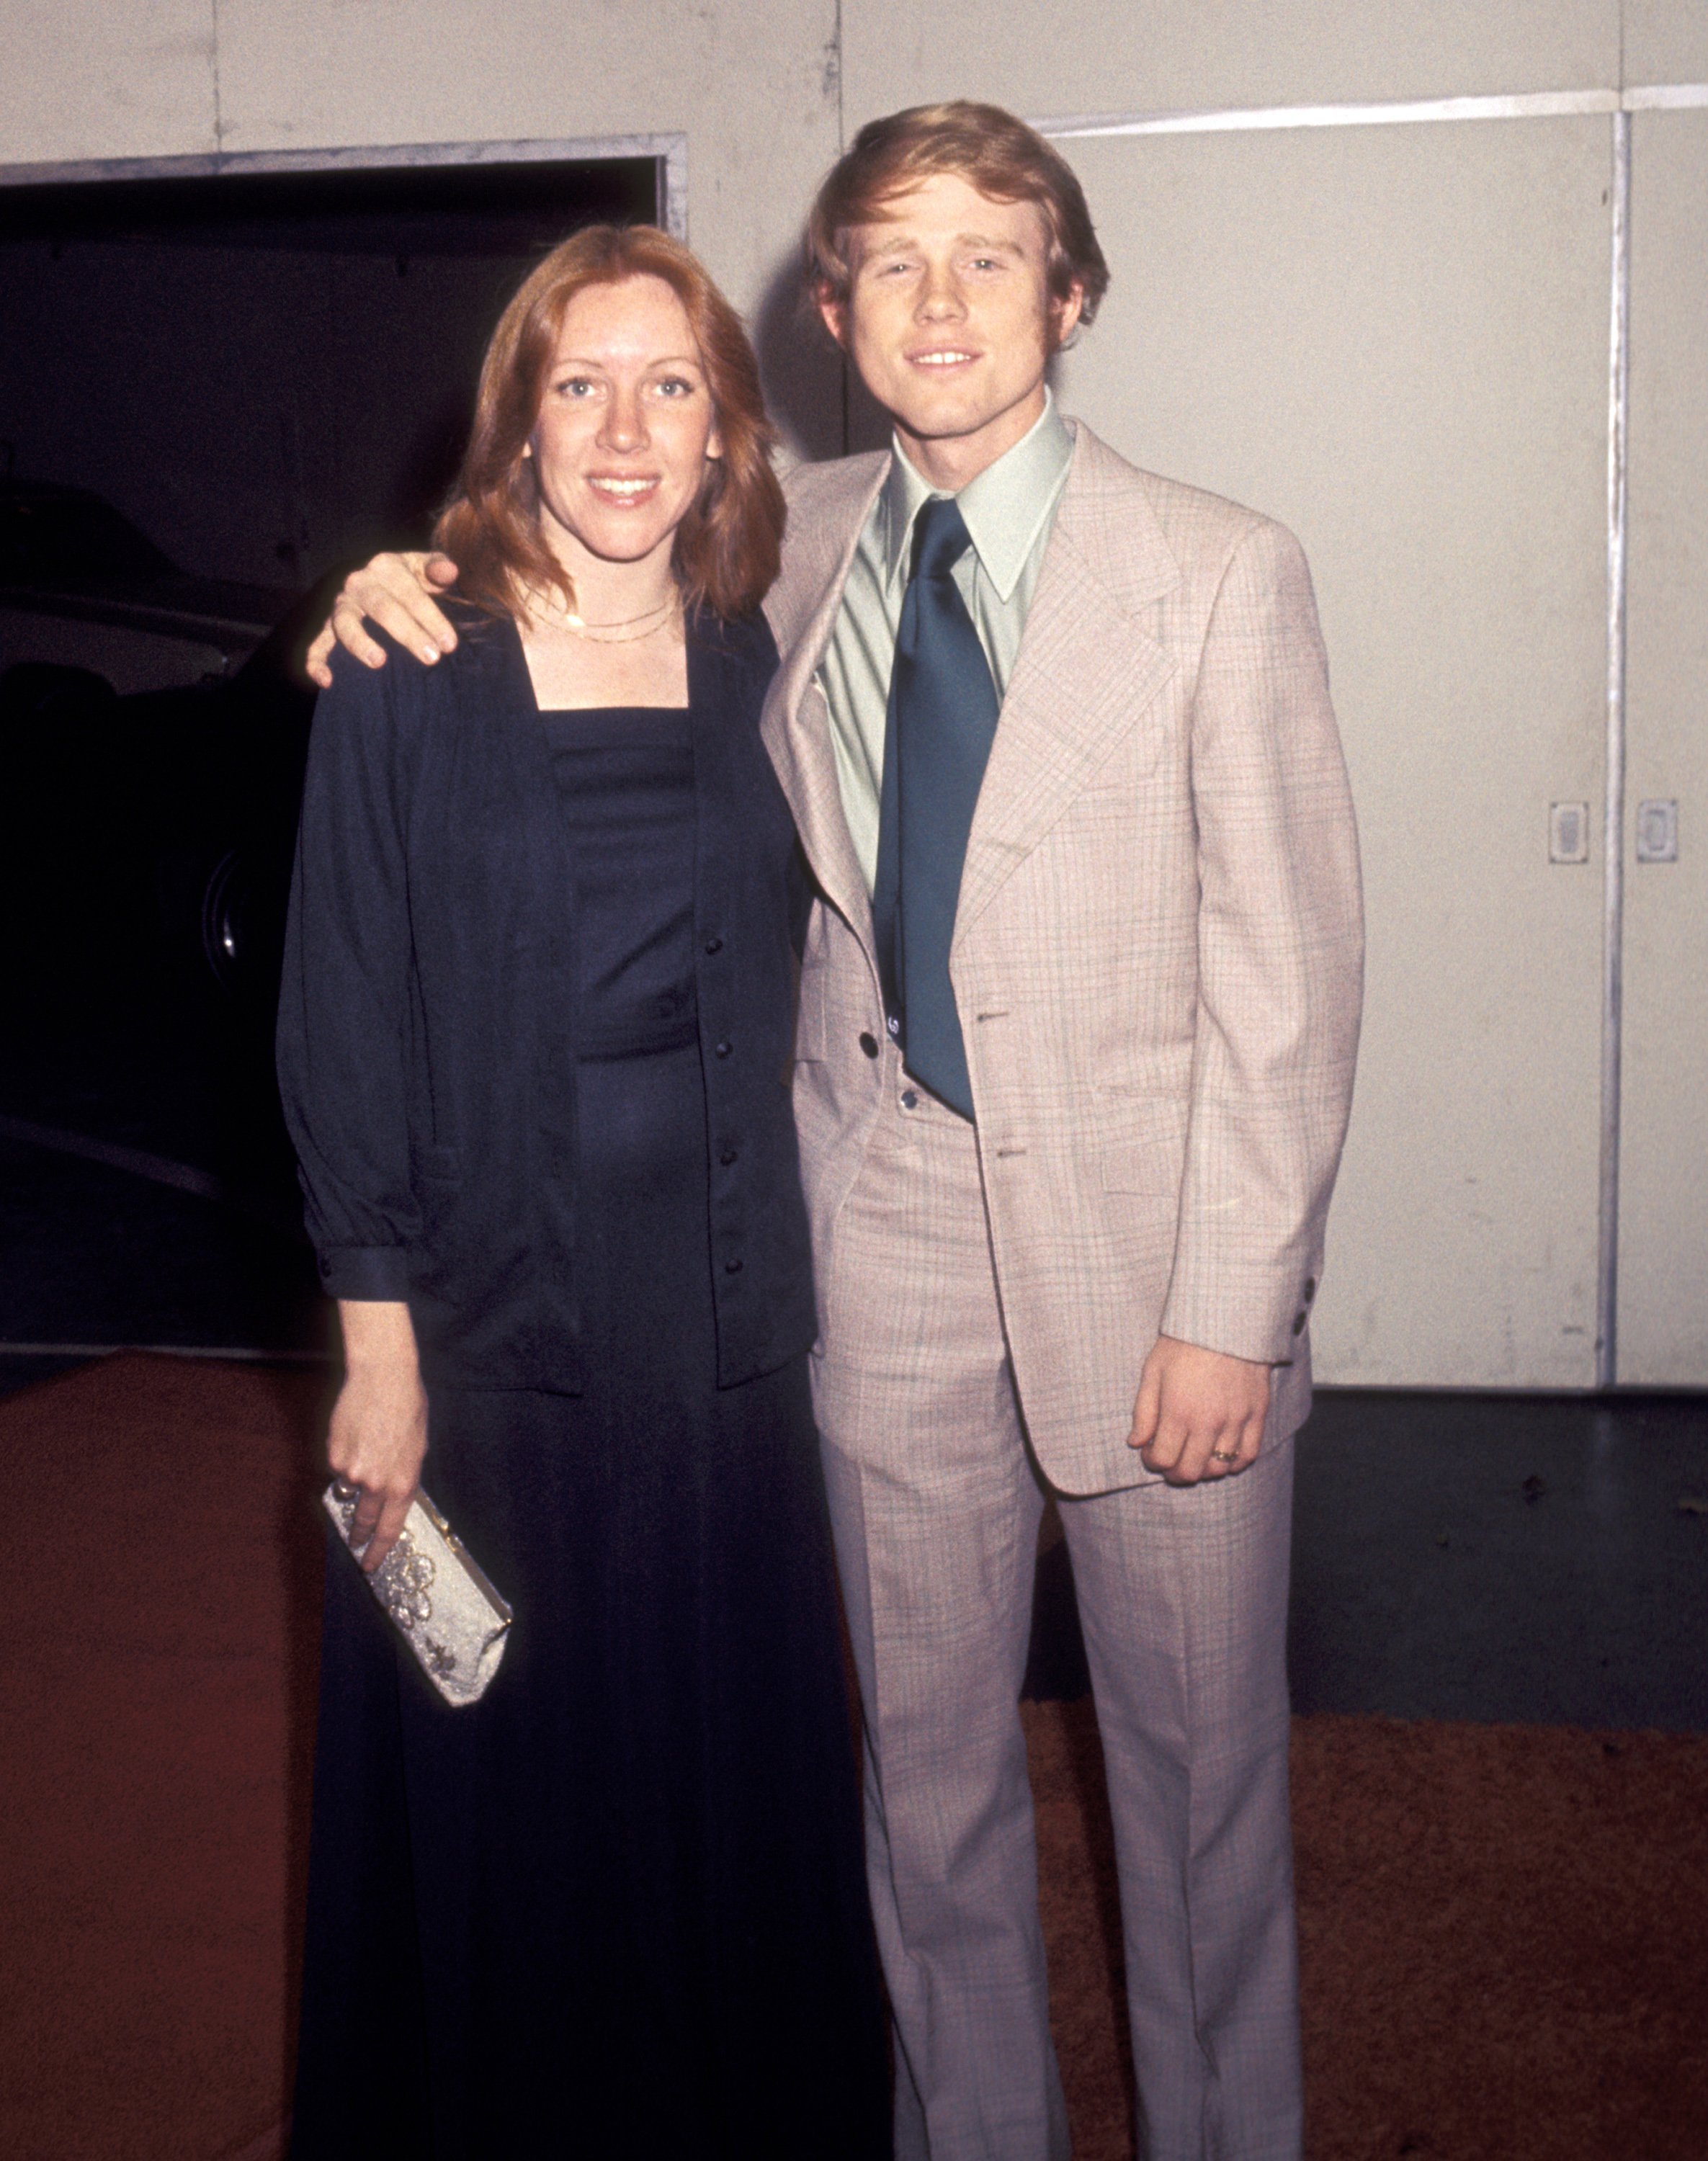 Ron Howard and Cheryl Howard during ABC Affiliate Banquet at Century Plaza Hotel on May 12, 1977 in New York City, New York | Photo: Getty Images